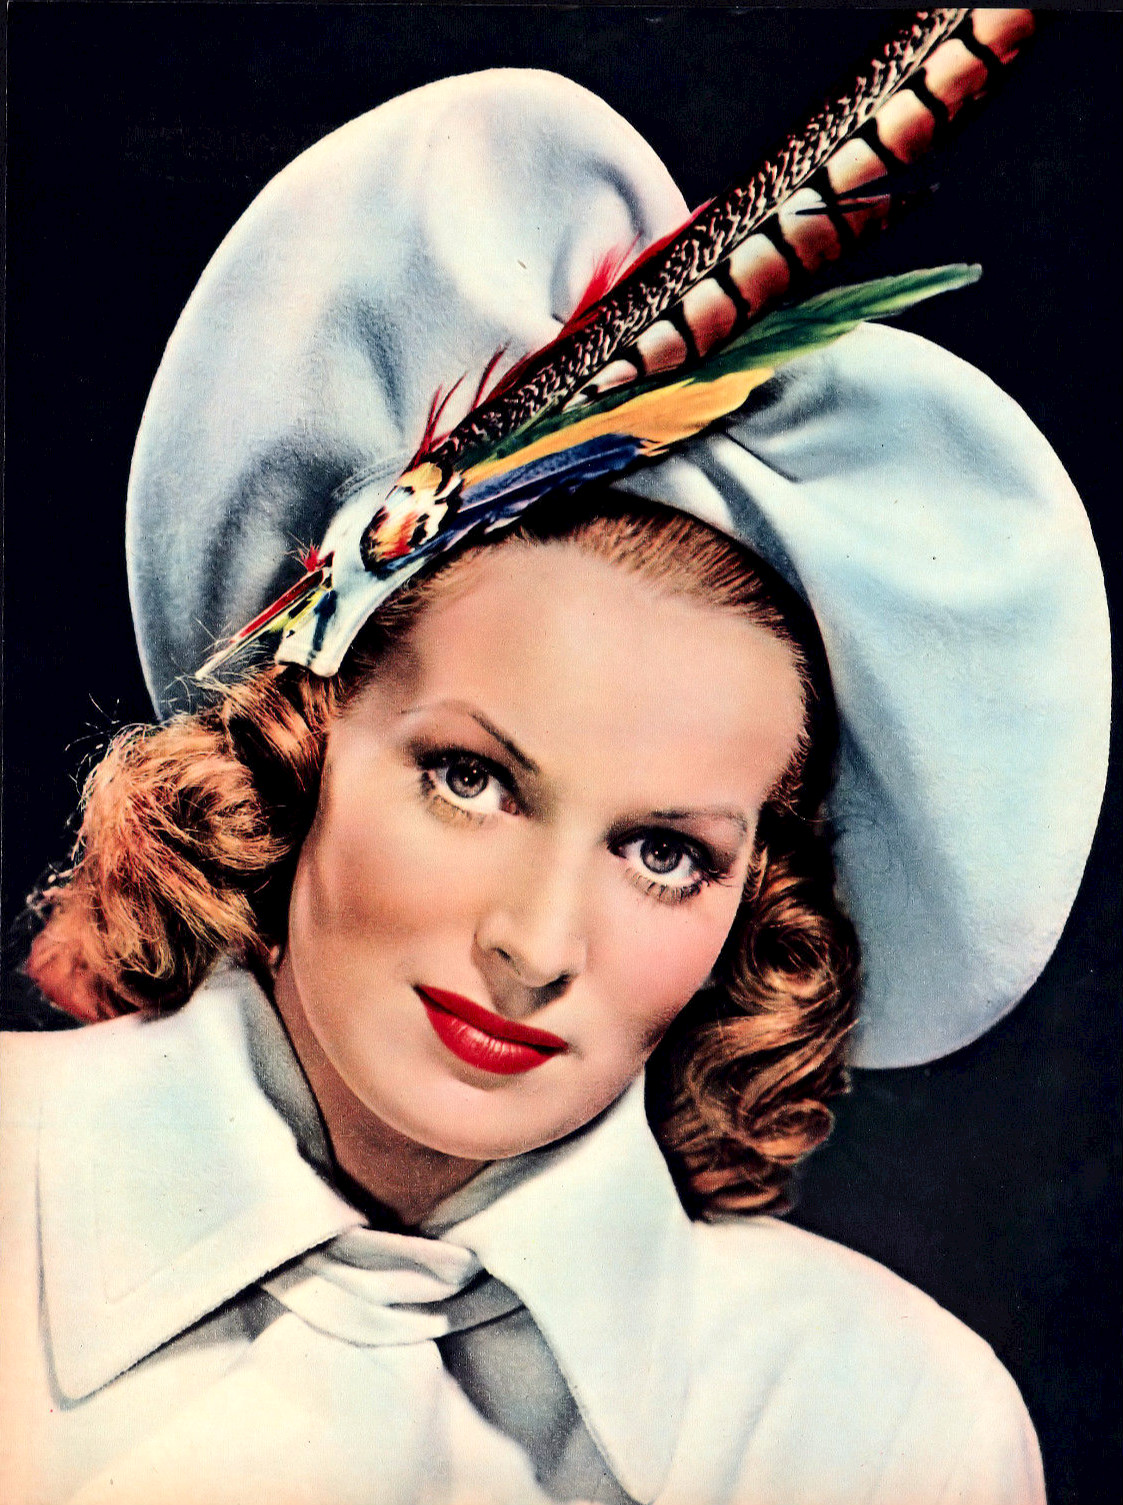 dennis hagerty recommends maureen o hara naked pic